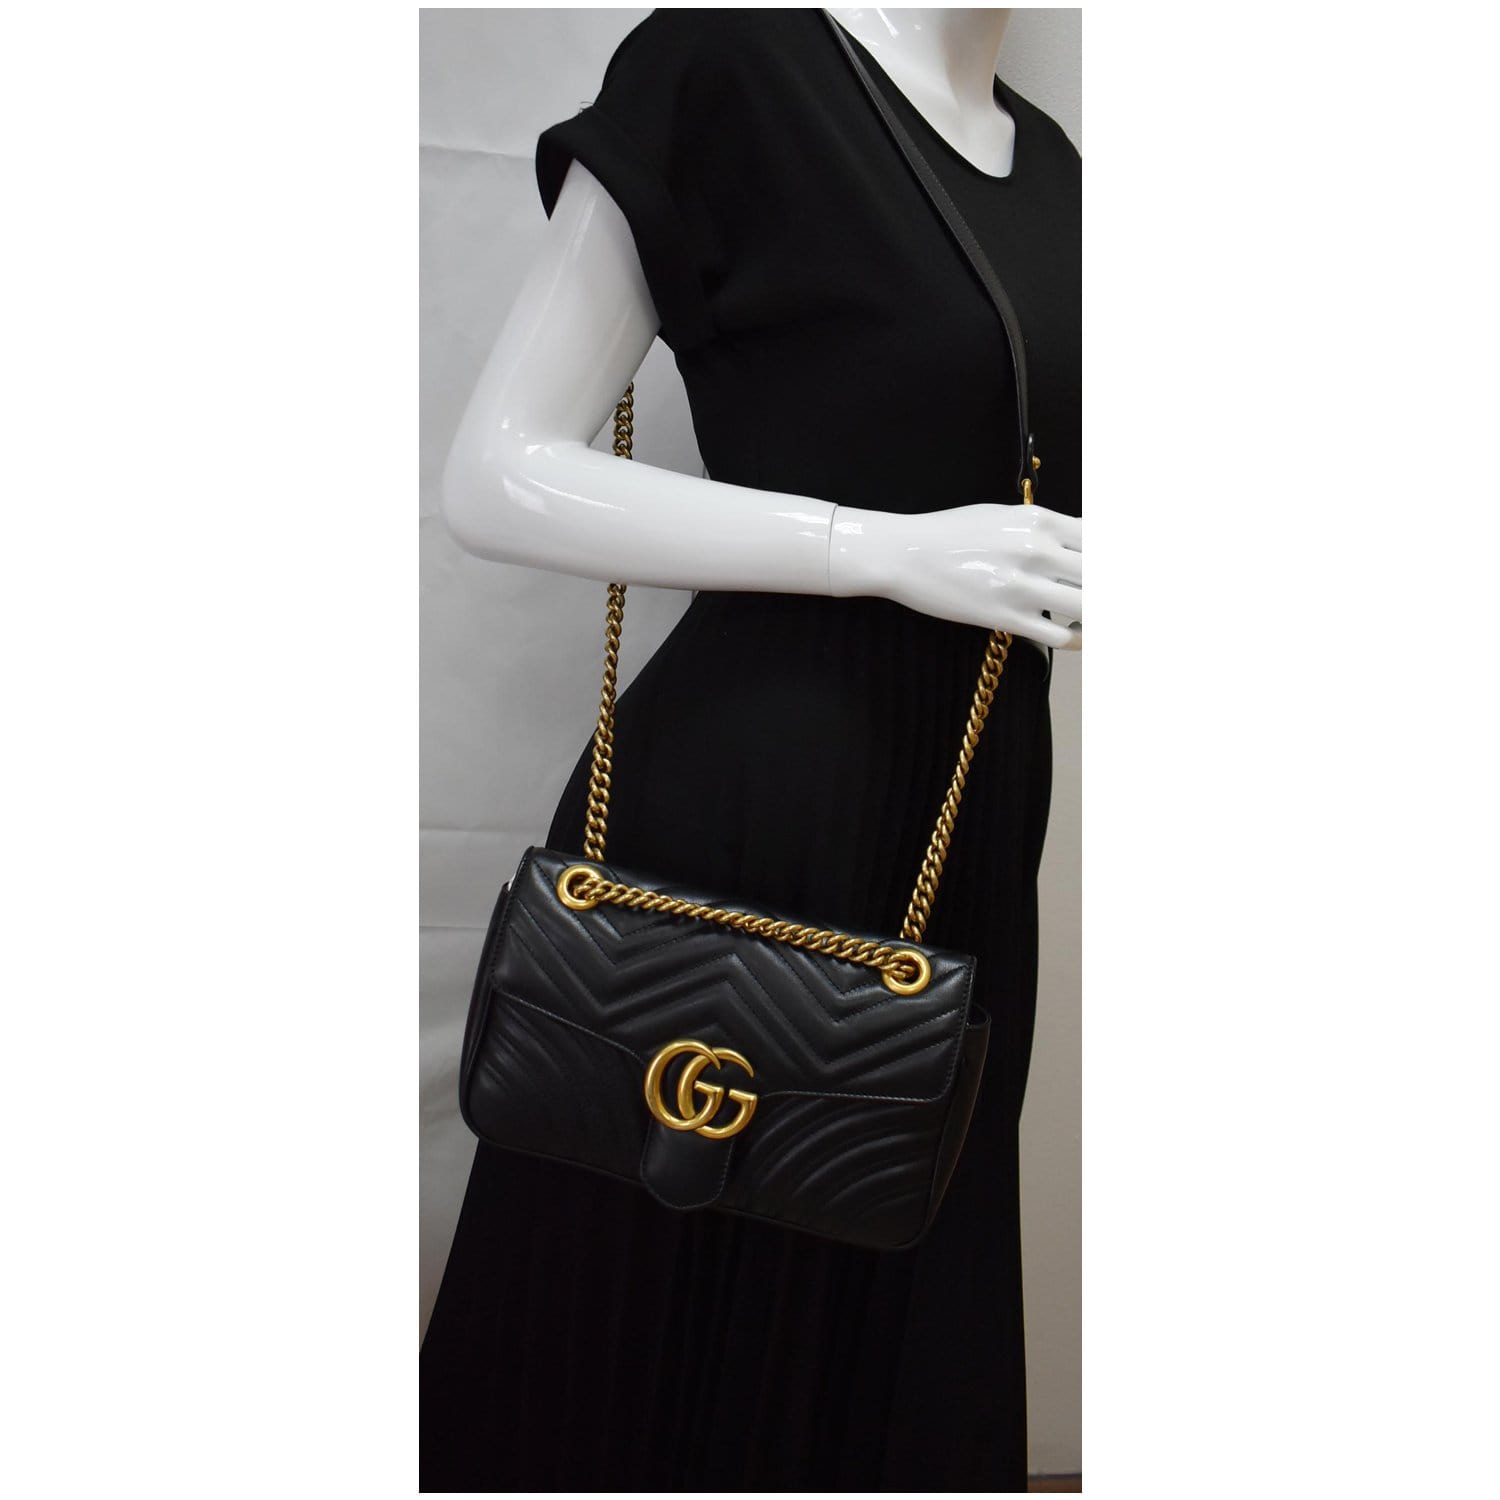 Gucci GG Marmont Small Shoulder Bag Review & What Fits Inside 